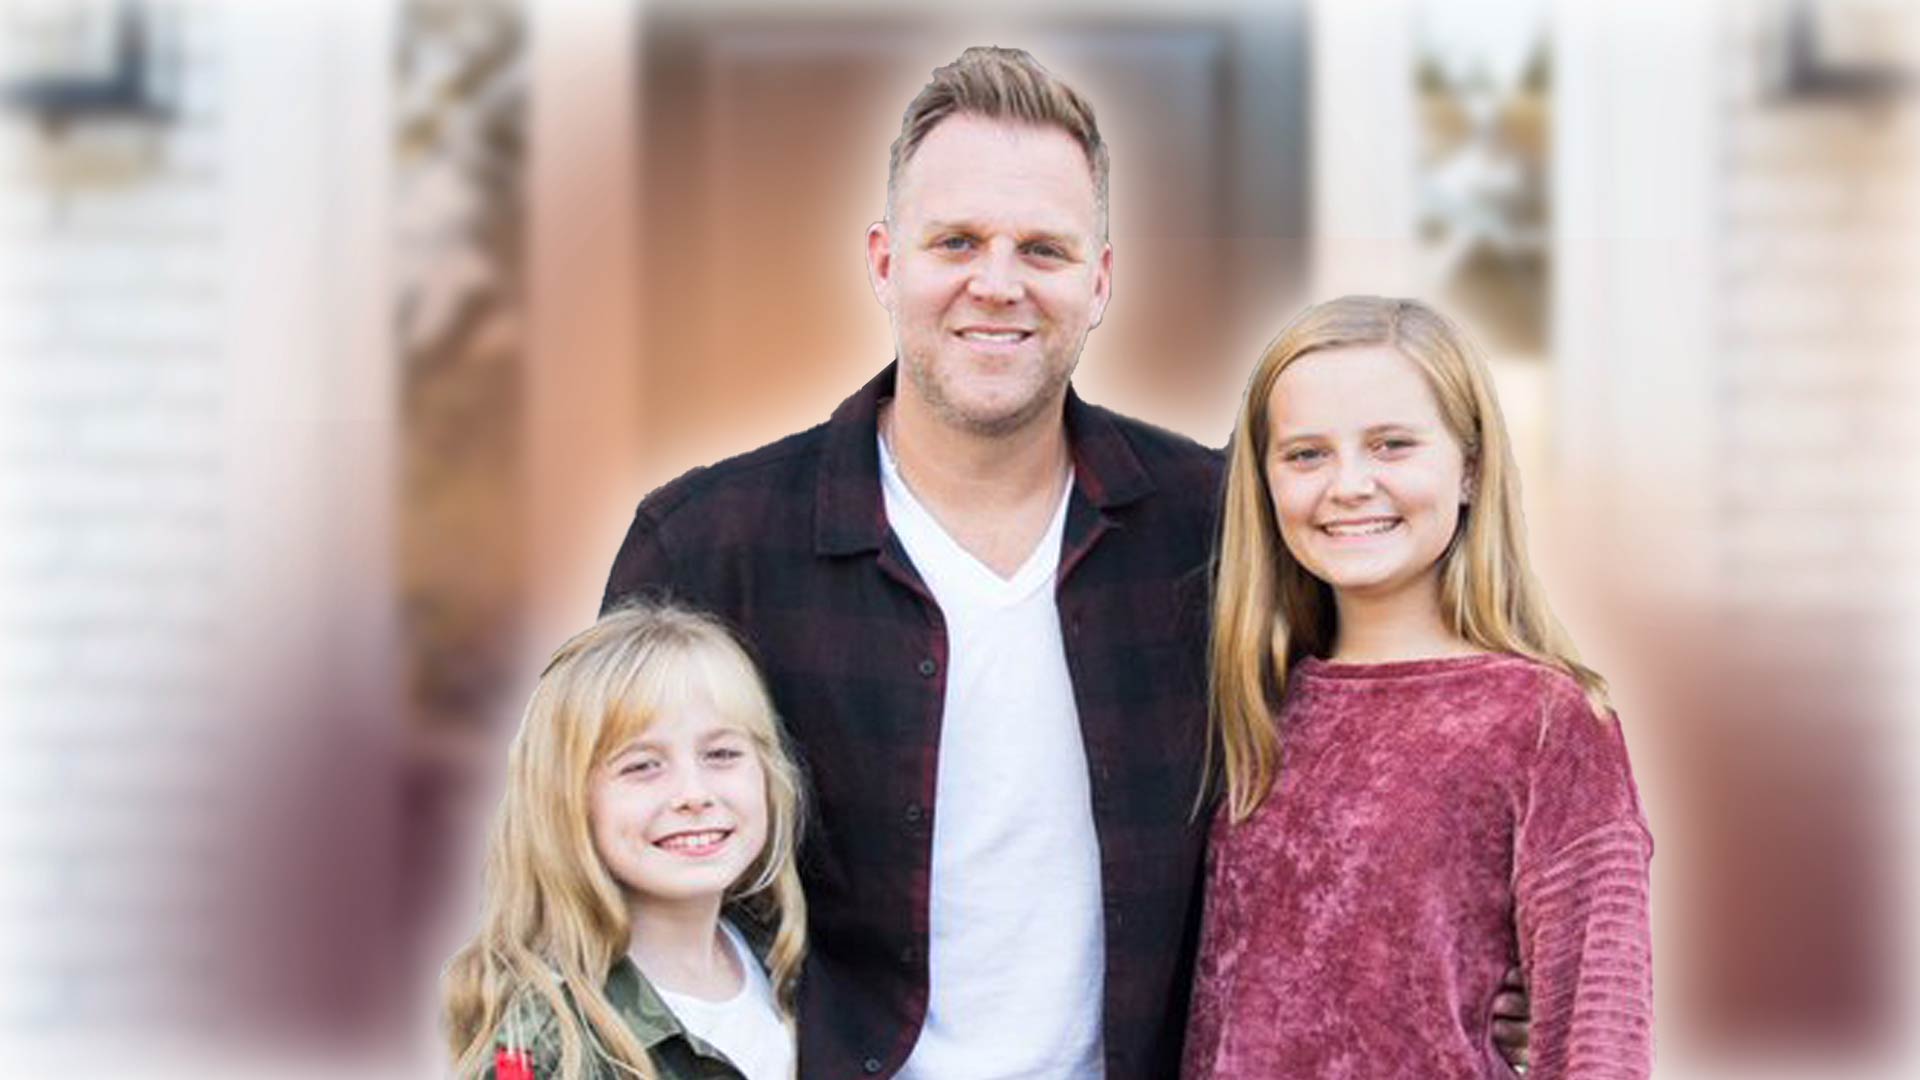 Matthew West Responds to Modest is Hottest Controversy